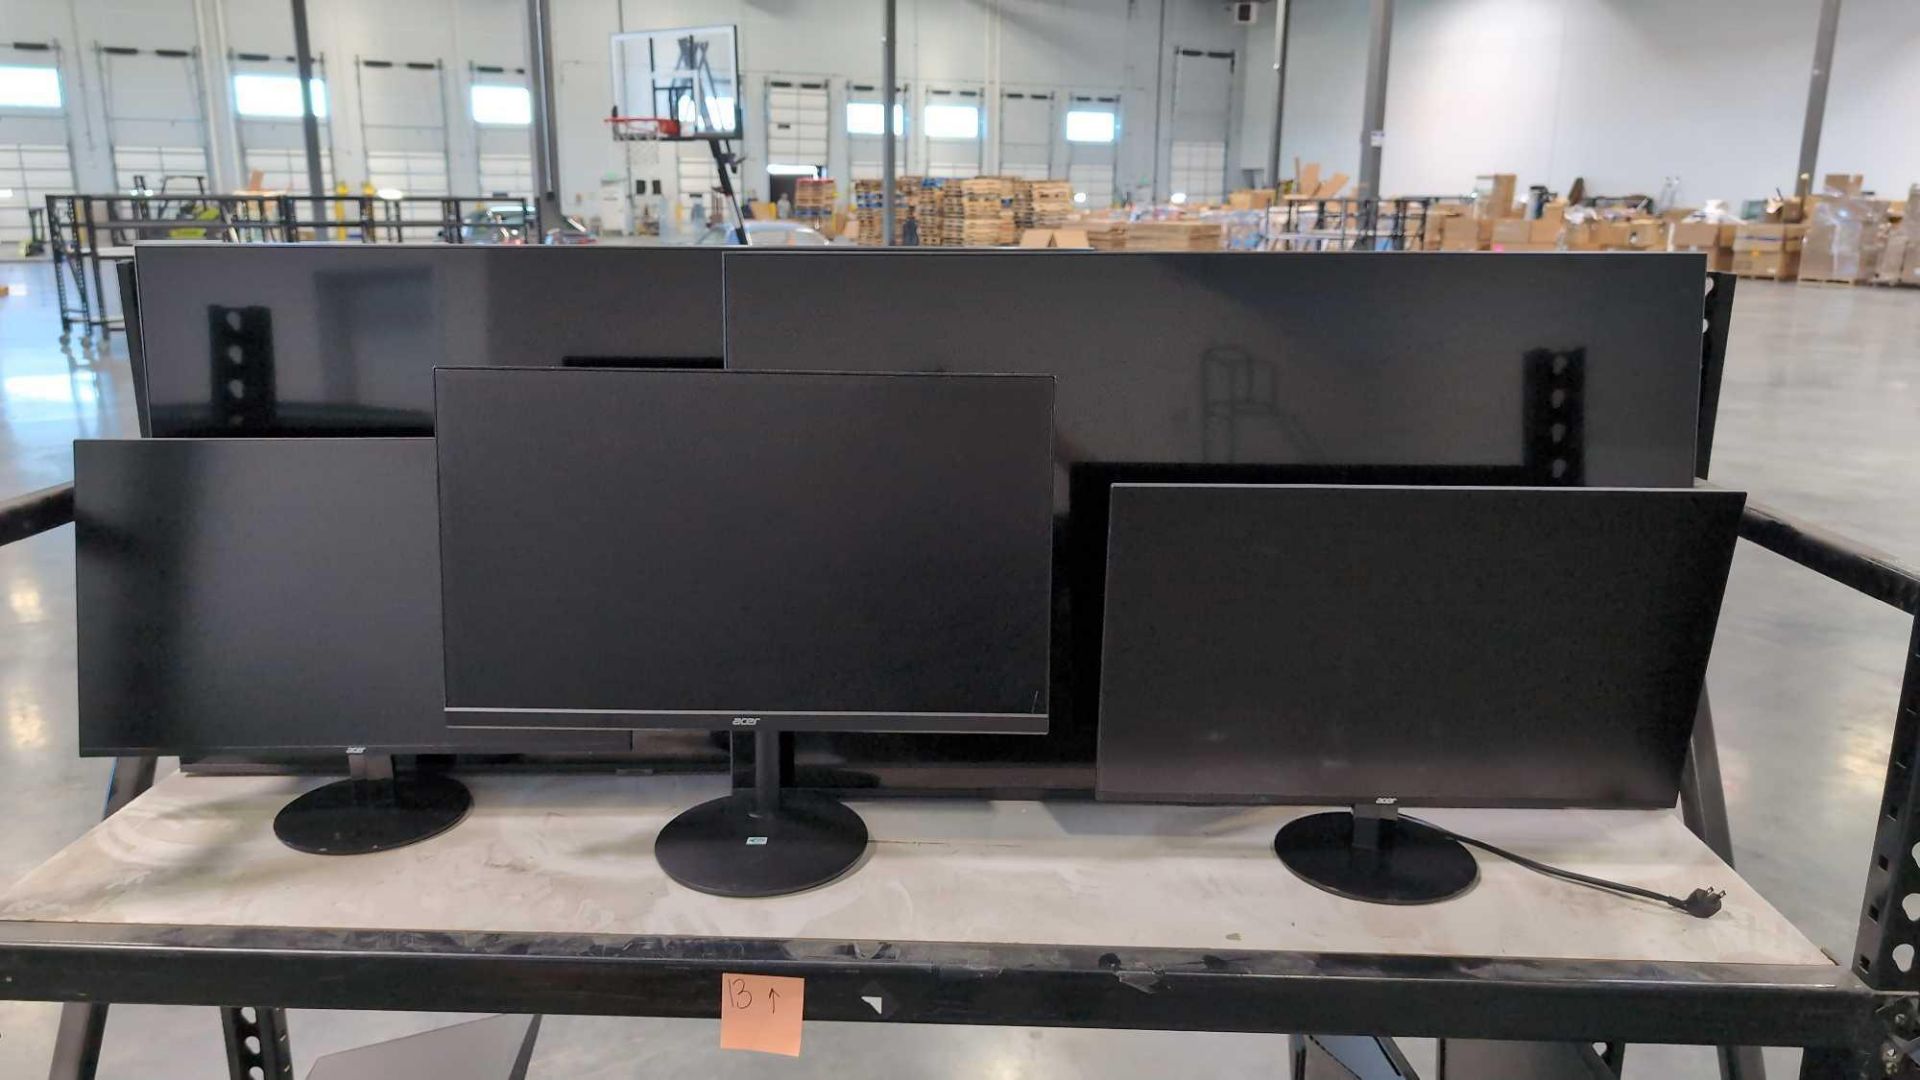 (2) used Samsung UN50TU7000F screens, and Acer monitors